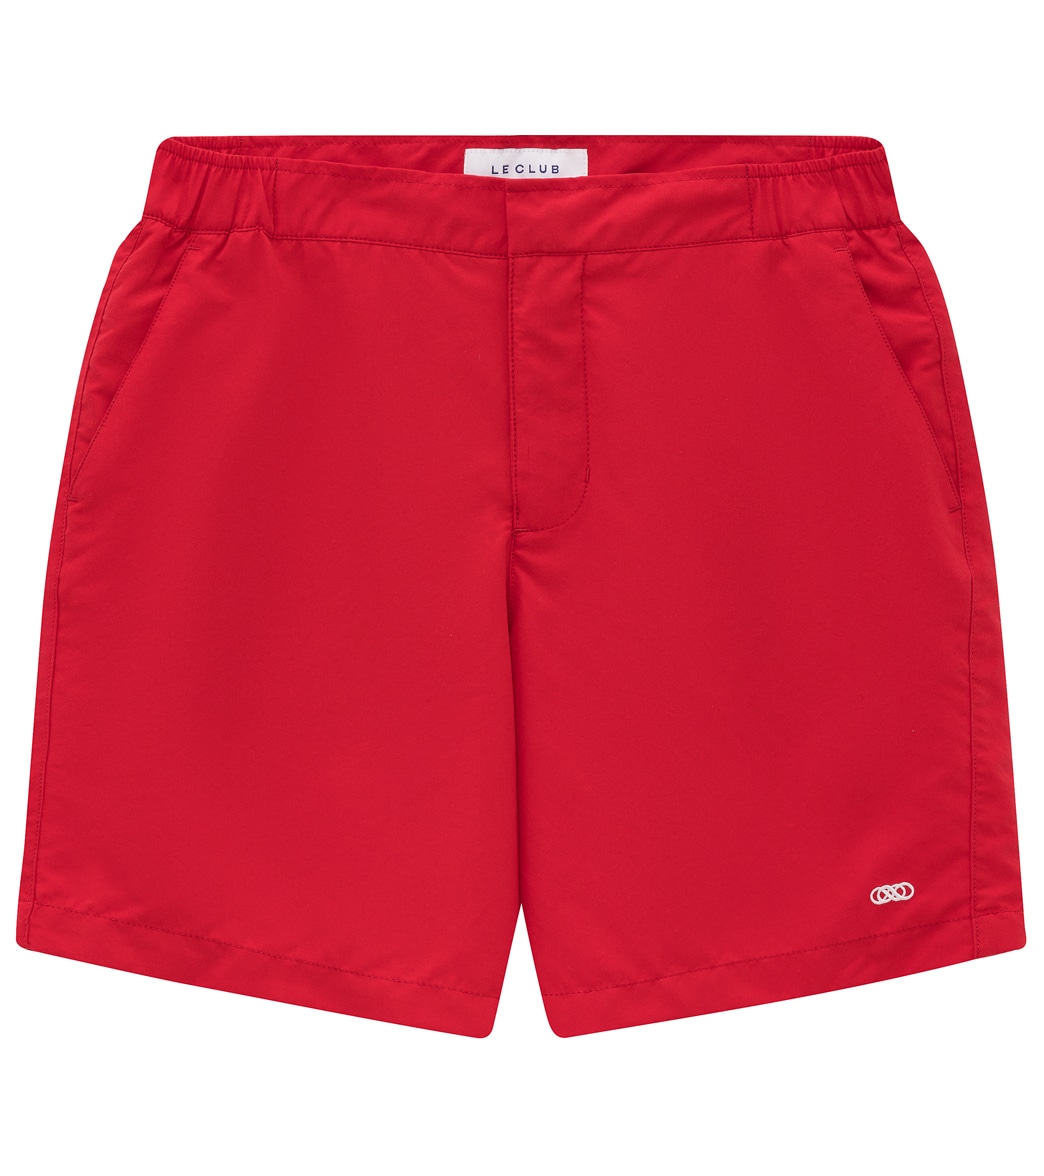 Le Club Men's Classic Banded Swim Trunks - Red Large - Swimoutlet.com